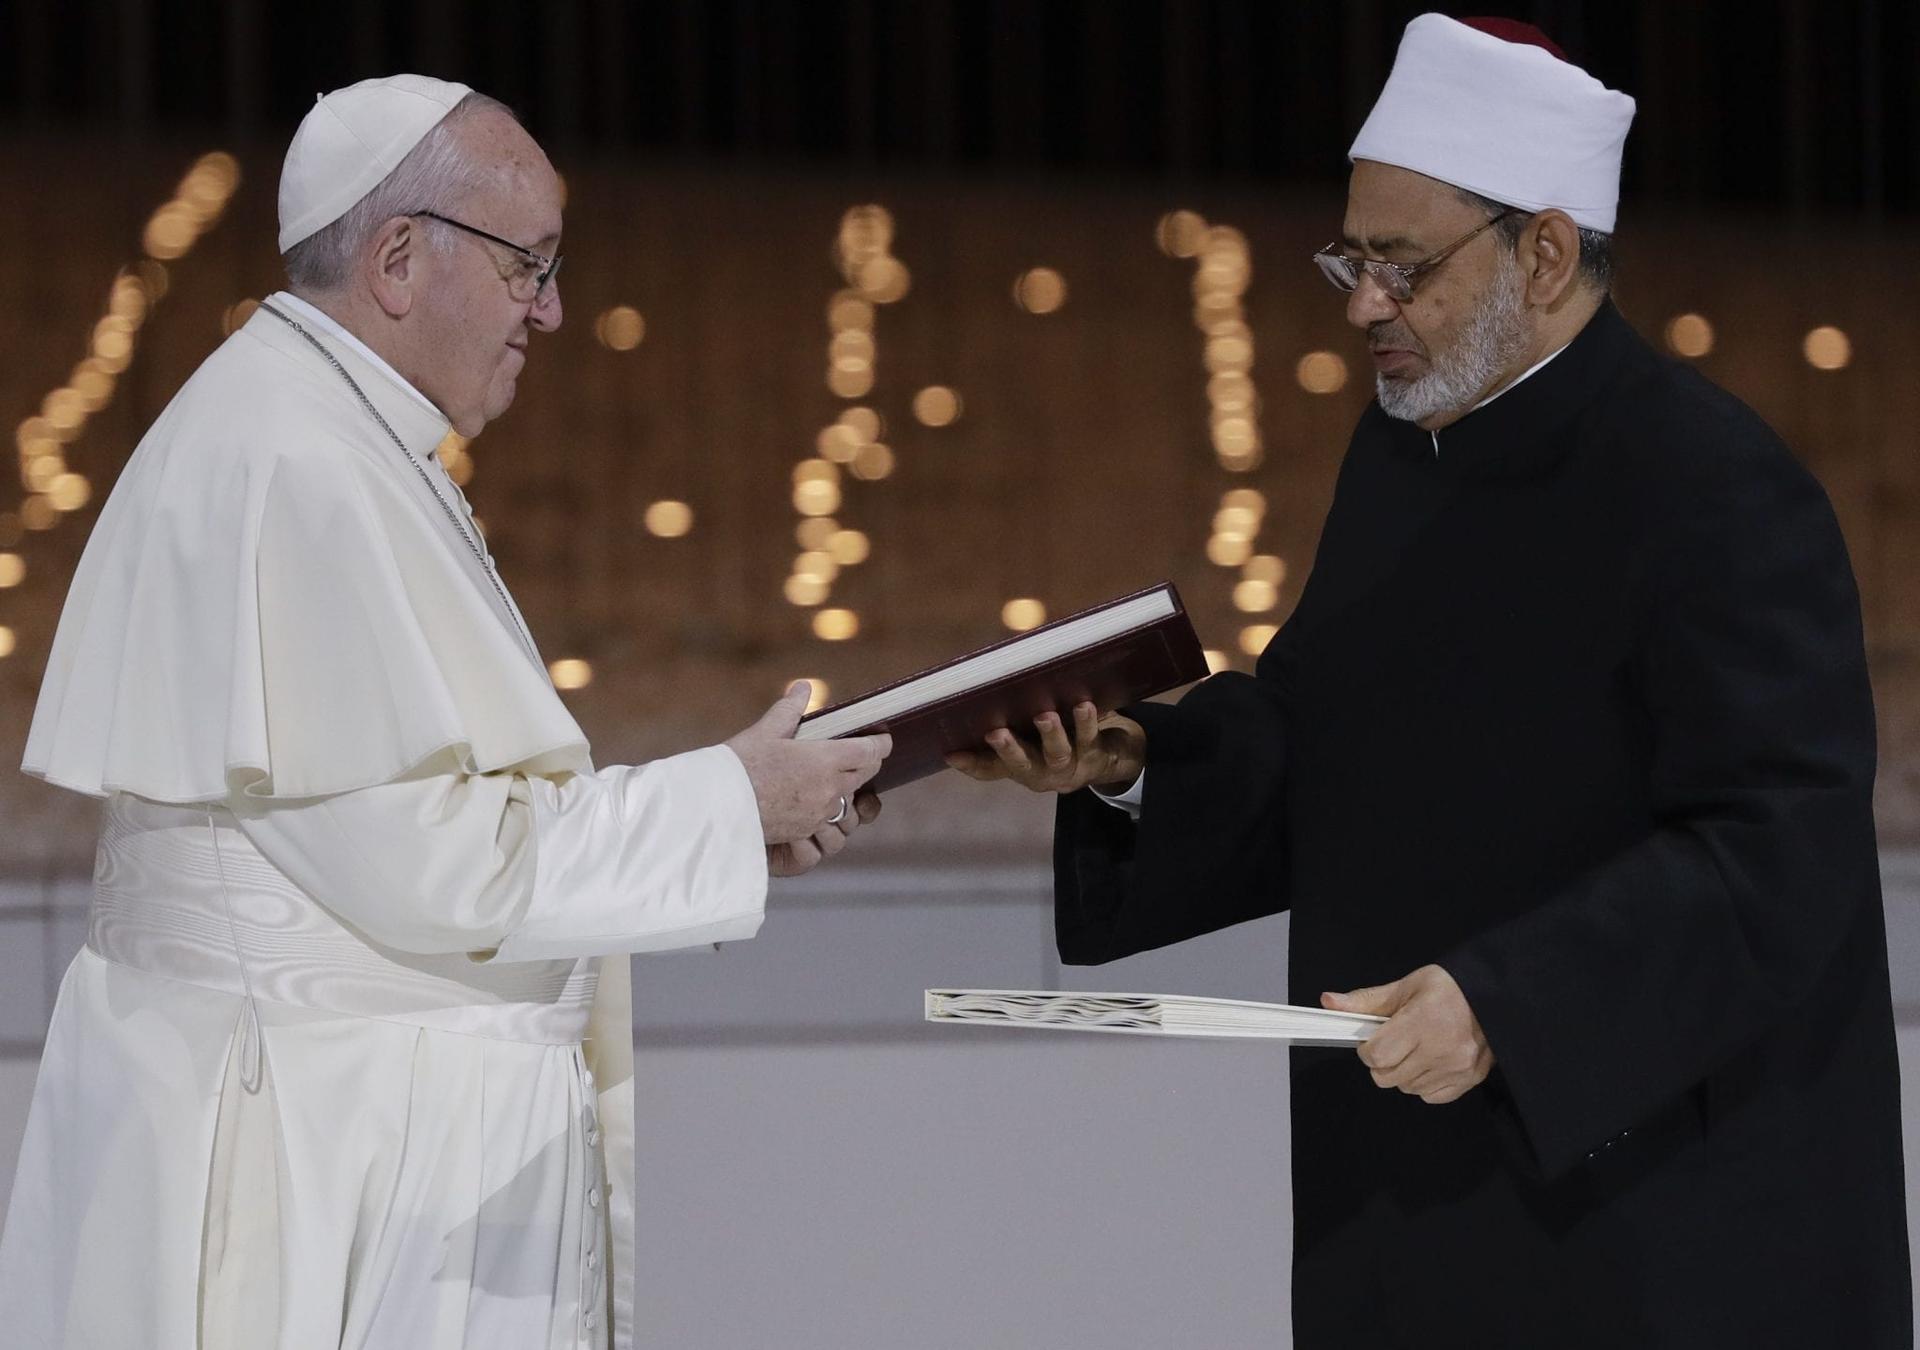 Biden joins Pope Francis, Grand Imam of Al-Azhar, in marking day of human fraternity